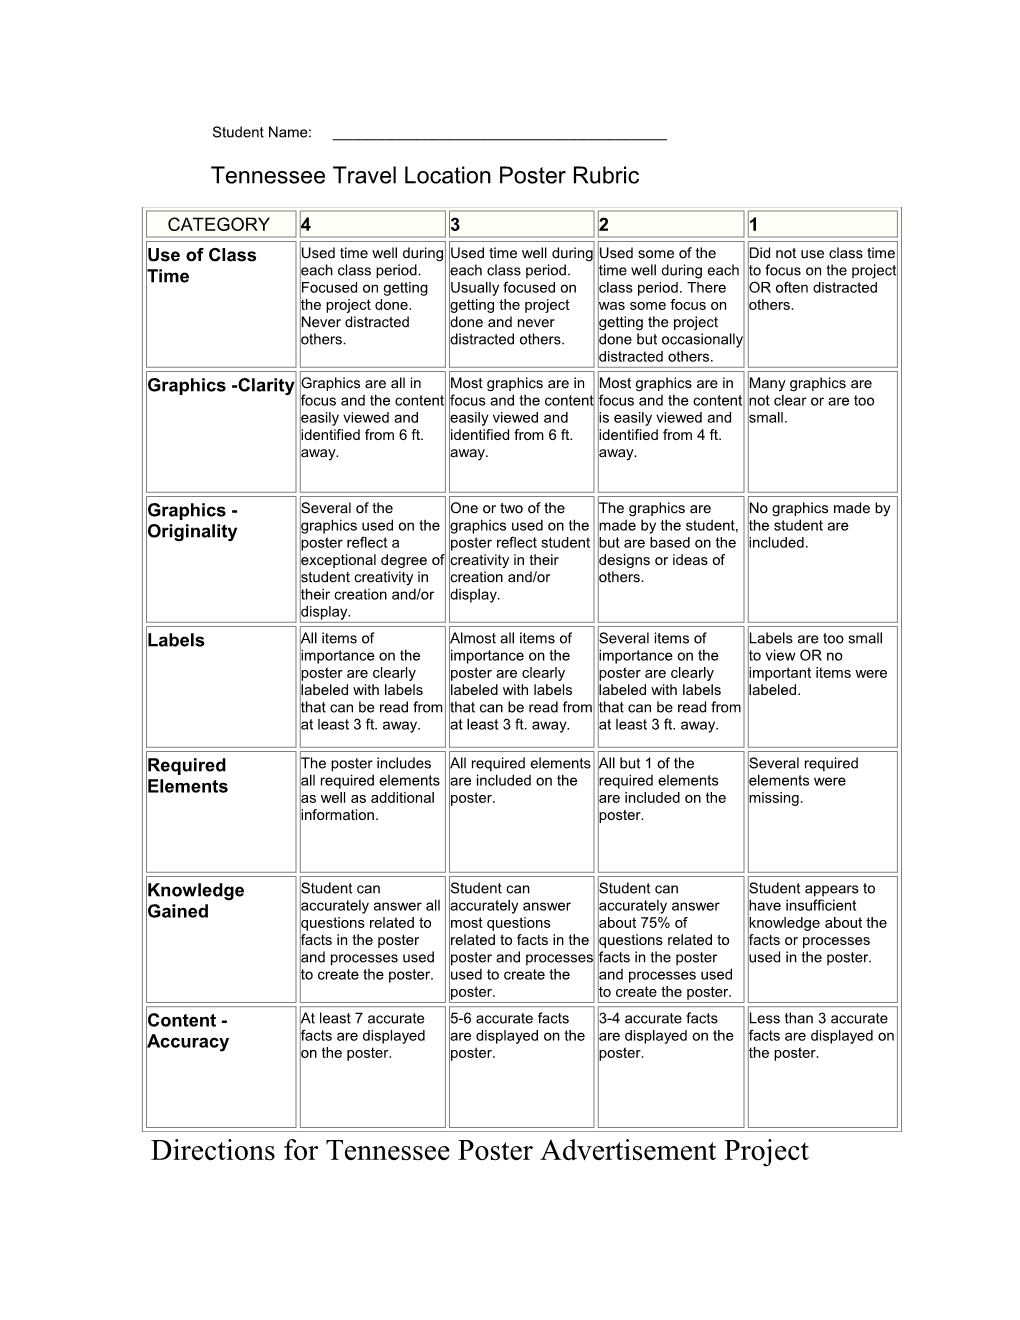 Tennessee Travel Location Poster Rubric